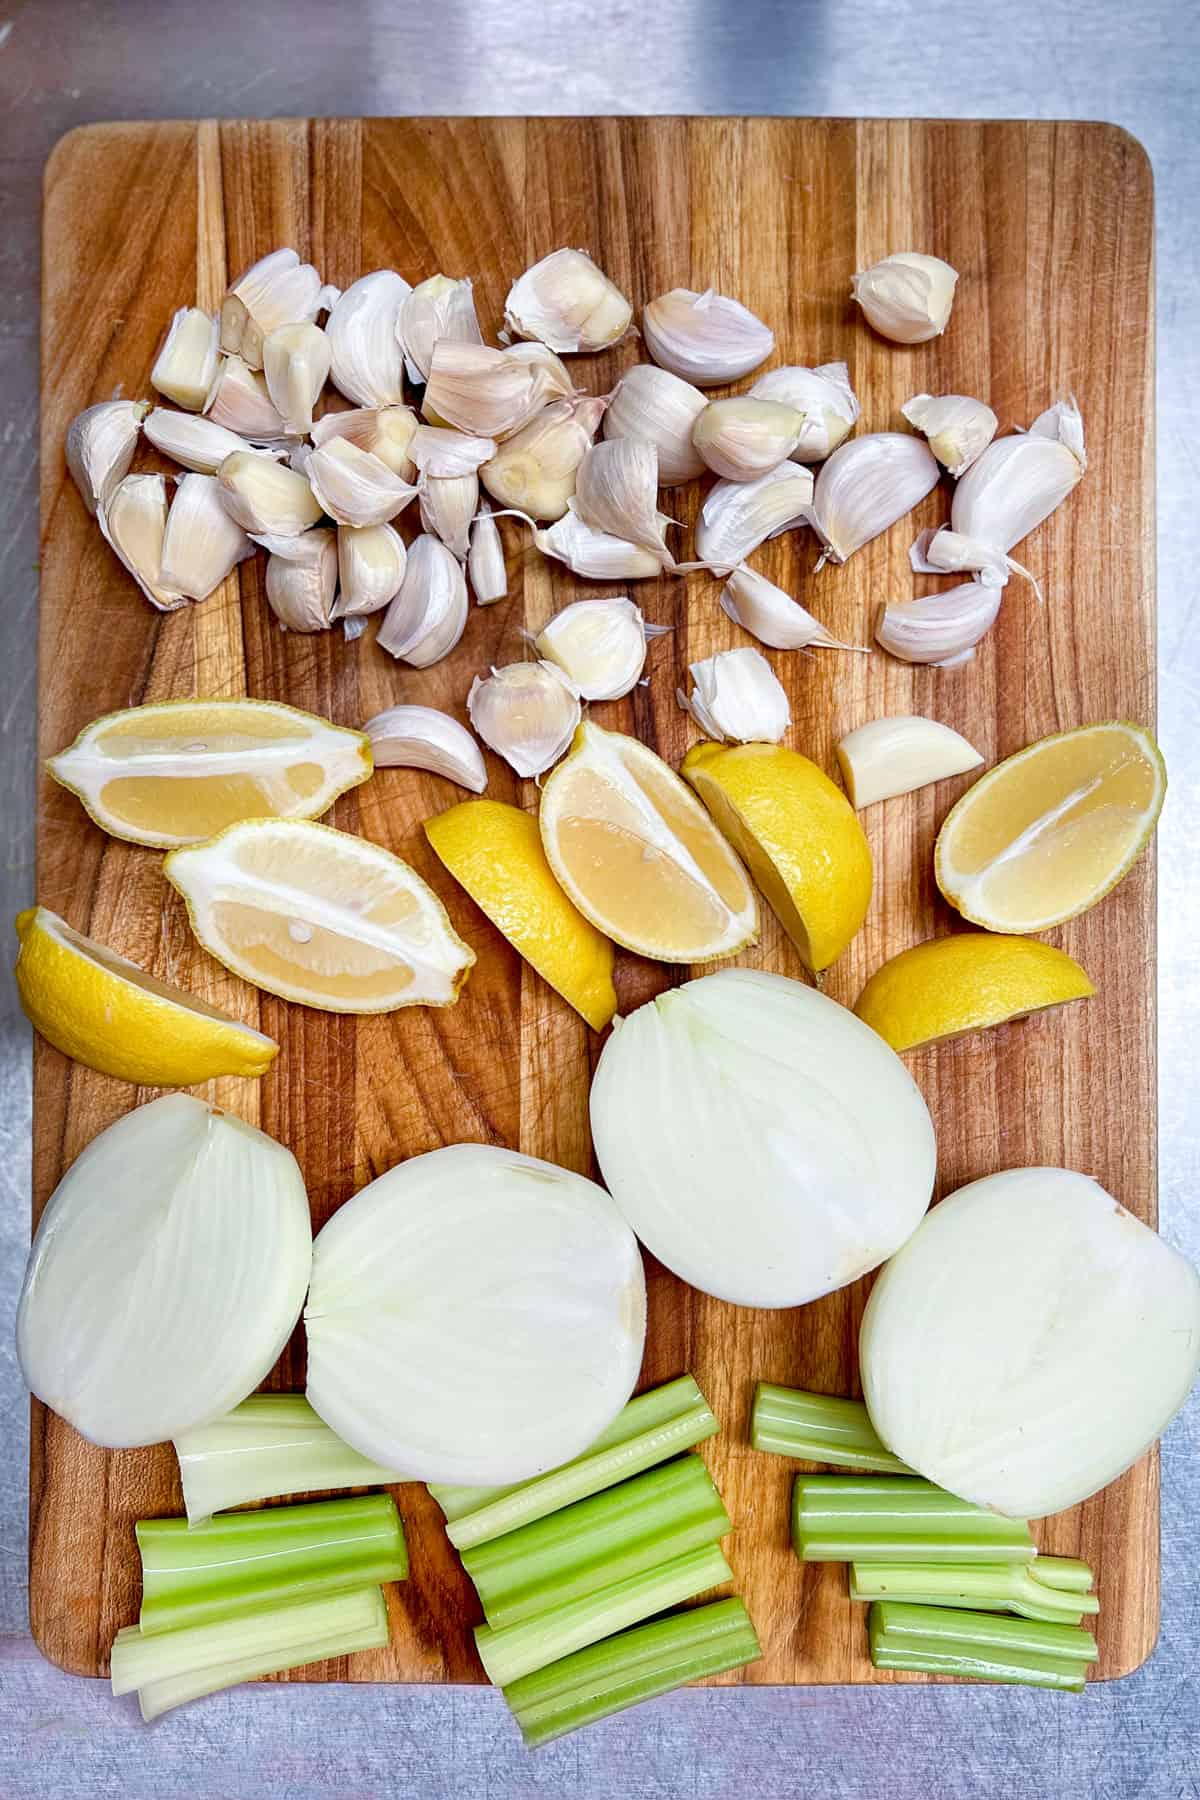 two onions sliced in half, 8 lemon wedges, celery sticks cut into 3-inch pieces and lots of separated garlic cloves